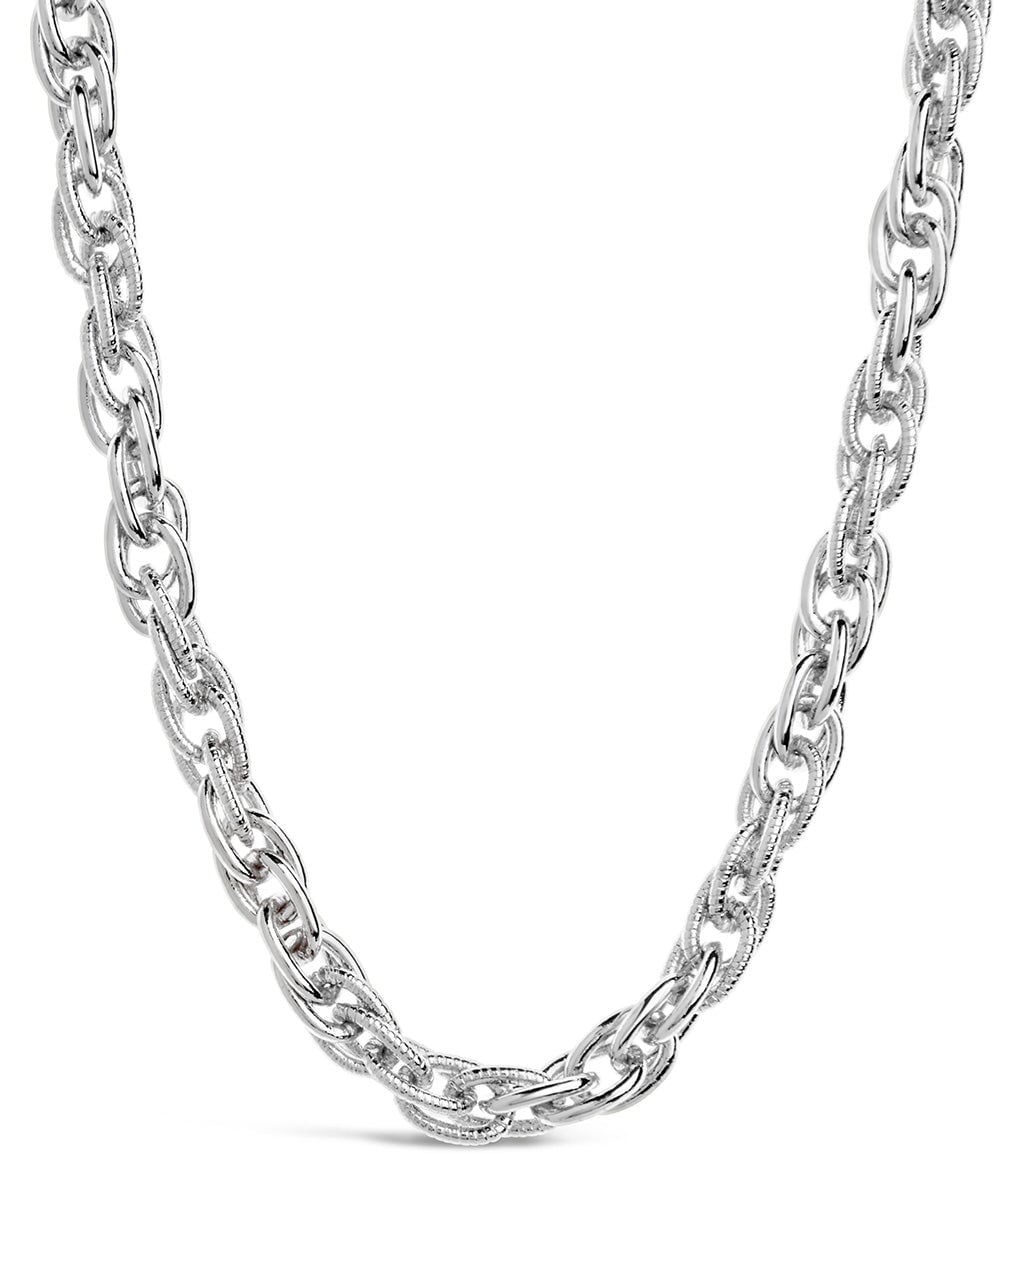 Alex Chain Necklace Necklace Sterling Forever Silver 